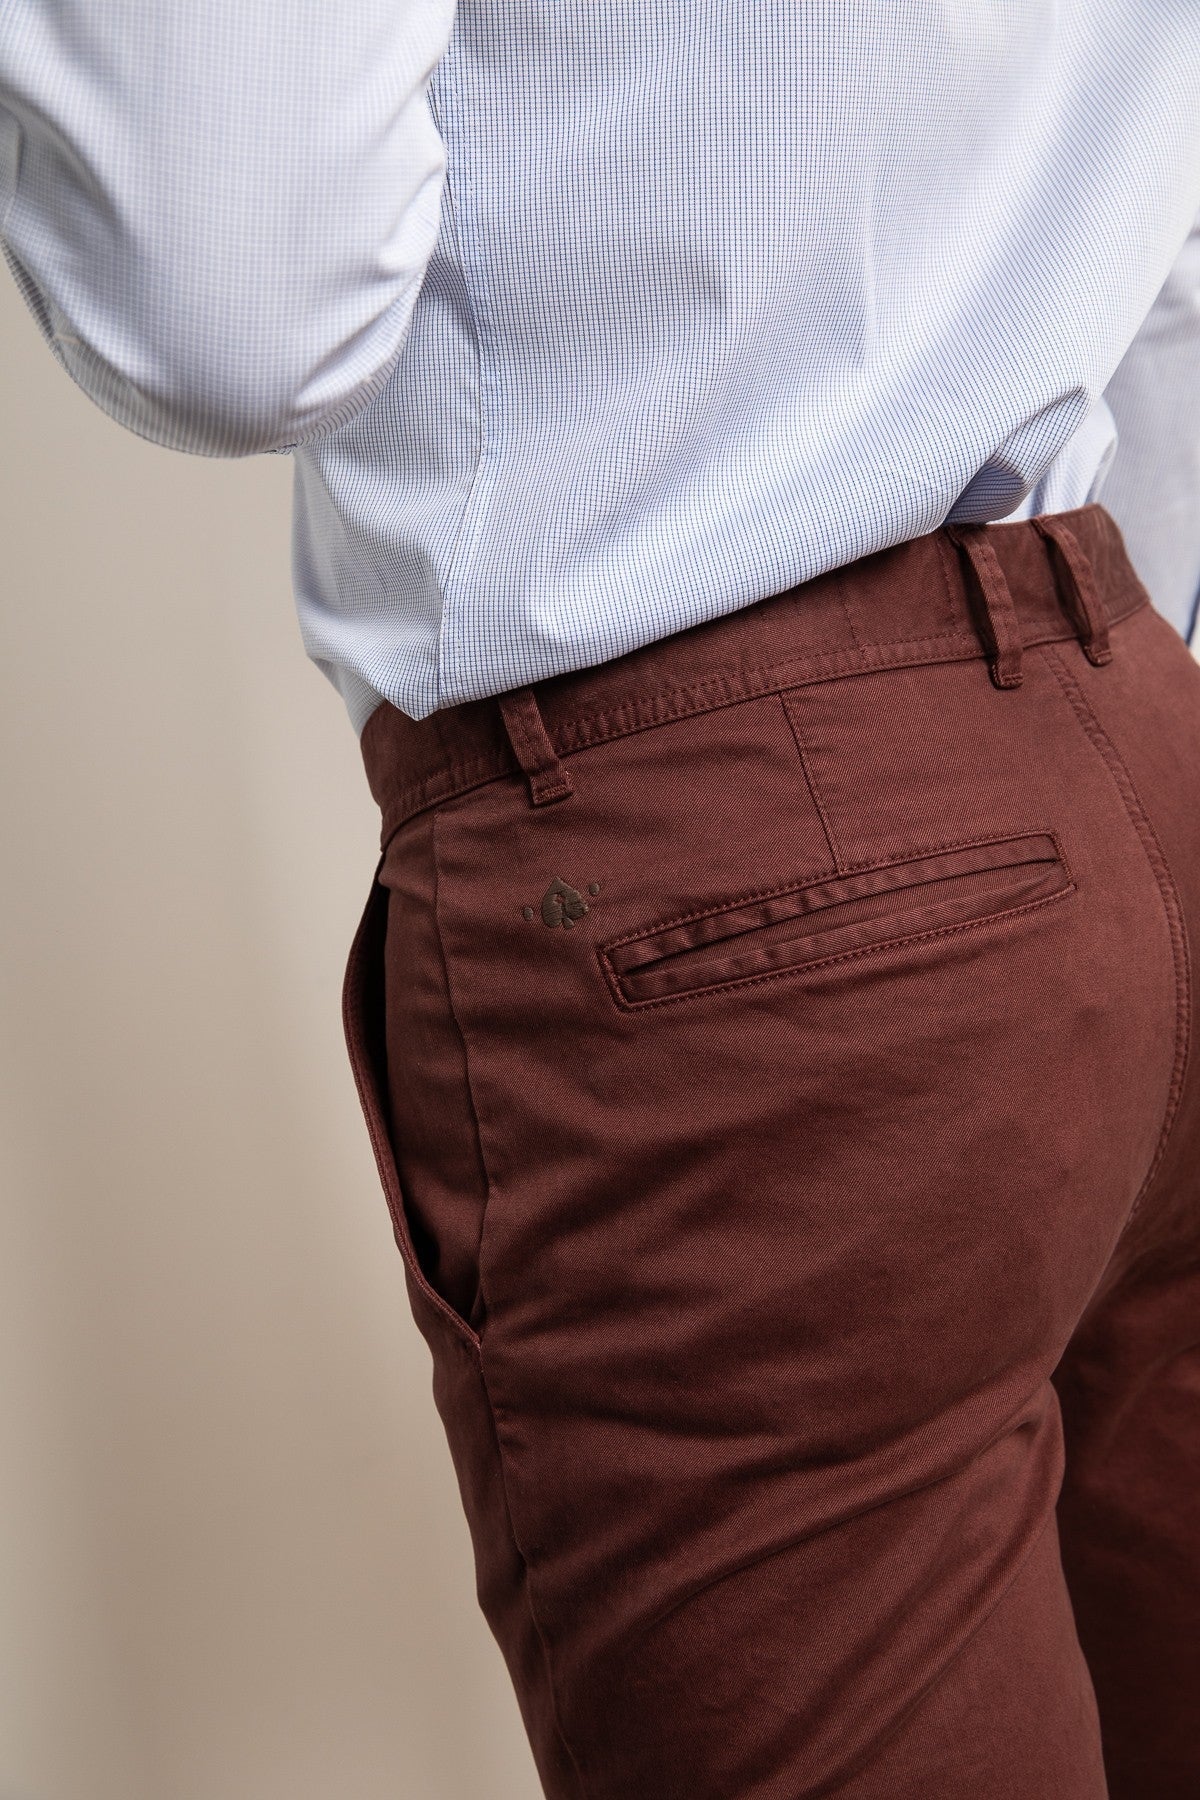 Jaqk - Burgundy Trousers - Walter - The Good Chic